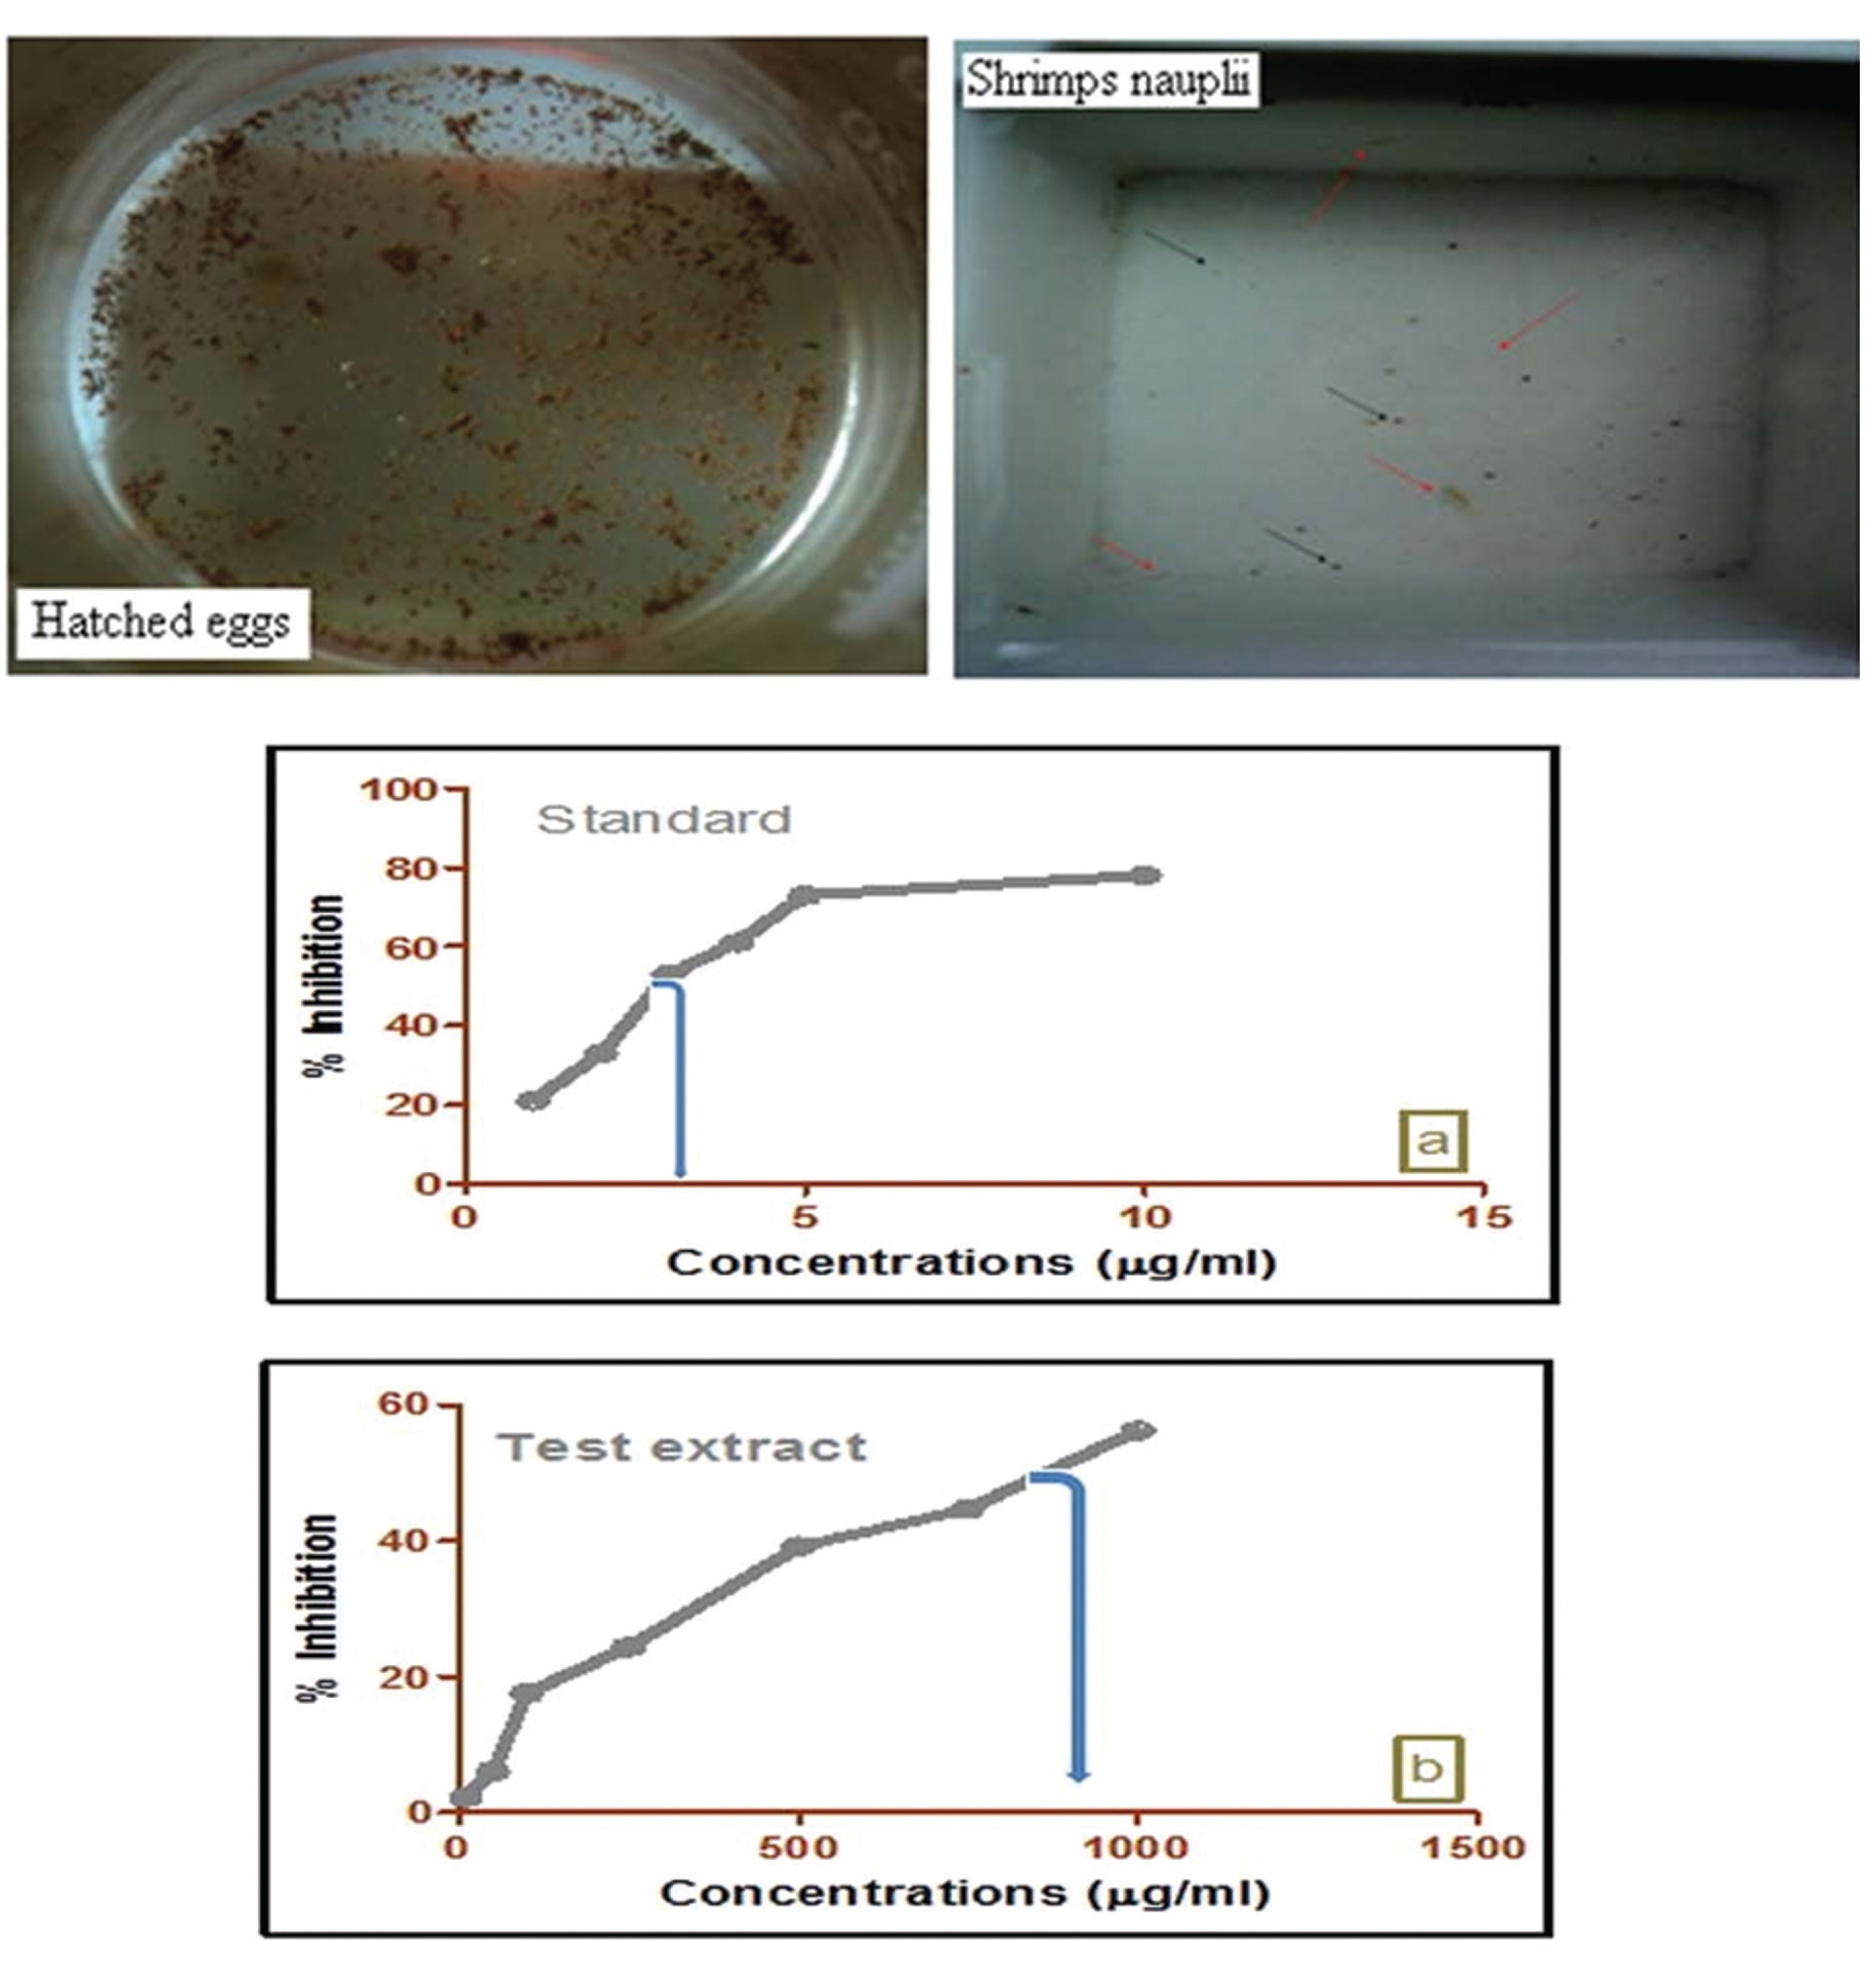 In vitro cytotoxicity evaluation of test extract of W. volubilis administered to brine shrimp nauplus. Potassium dichromate was used as a reference standard. Percentage inhibitions of test samples are dose dependent. Each value is expressed as a mean ± standard deviation (n = 3).